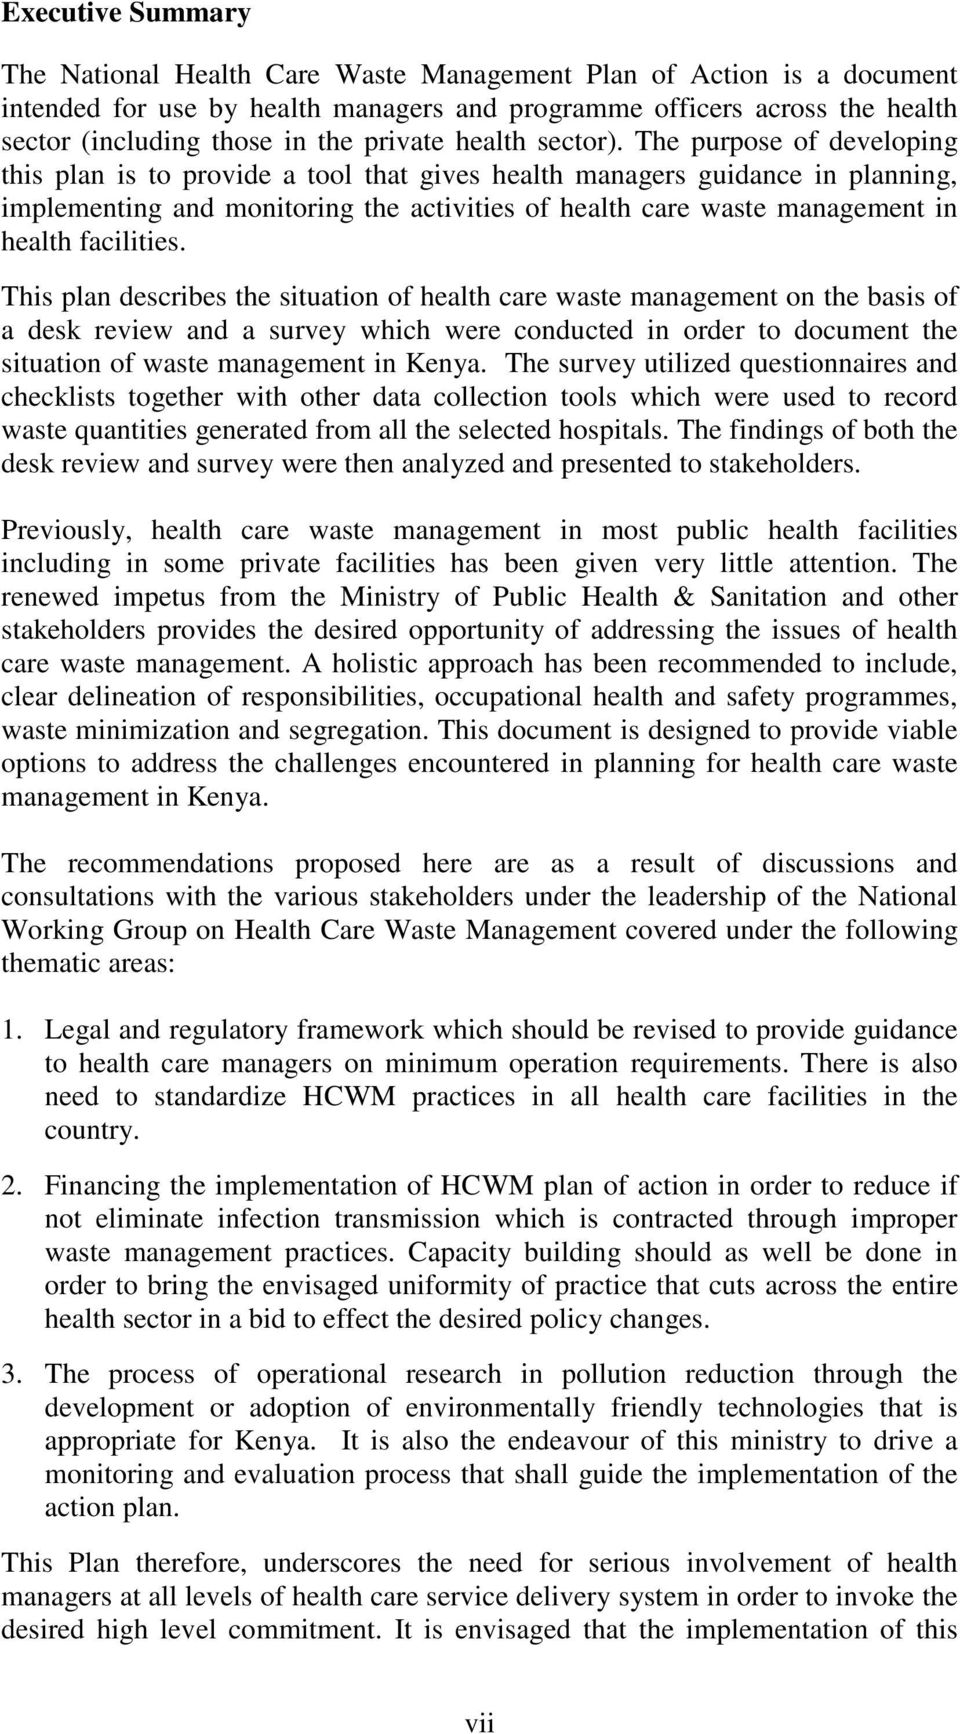 The purpose of developing this plan is to provide a tool that gives health managers guidance in planning, implementing and monitoring the activities of health care waste management in health